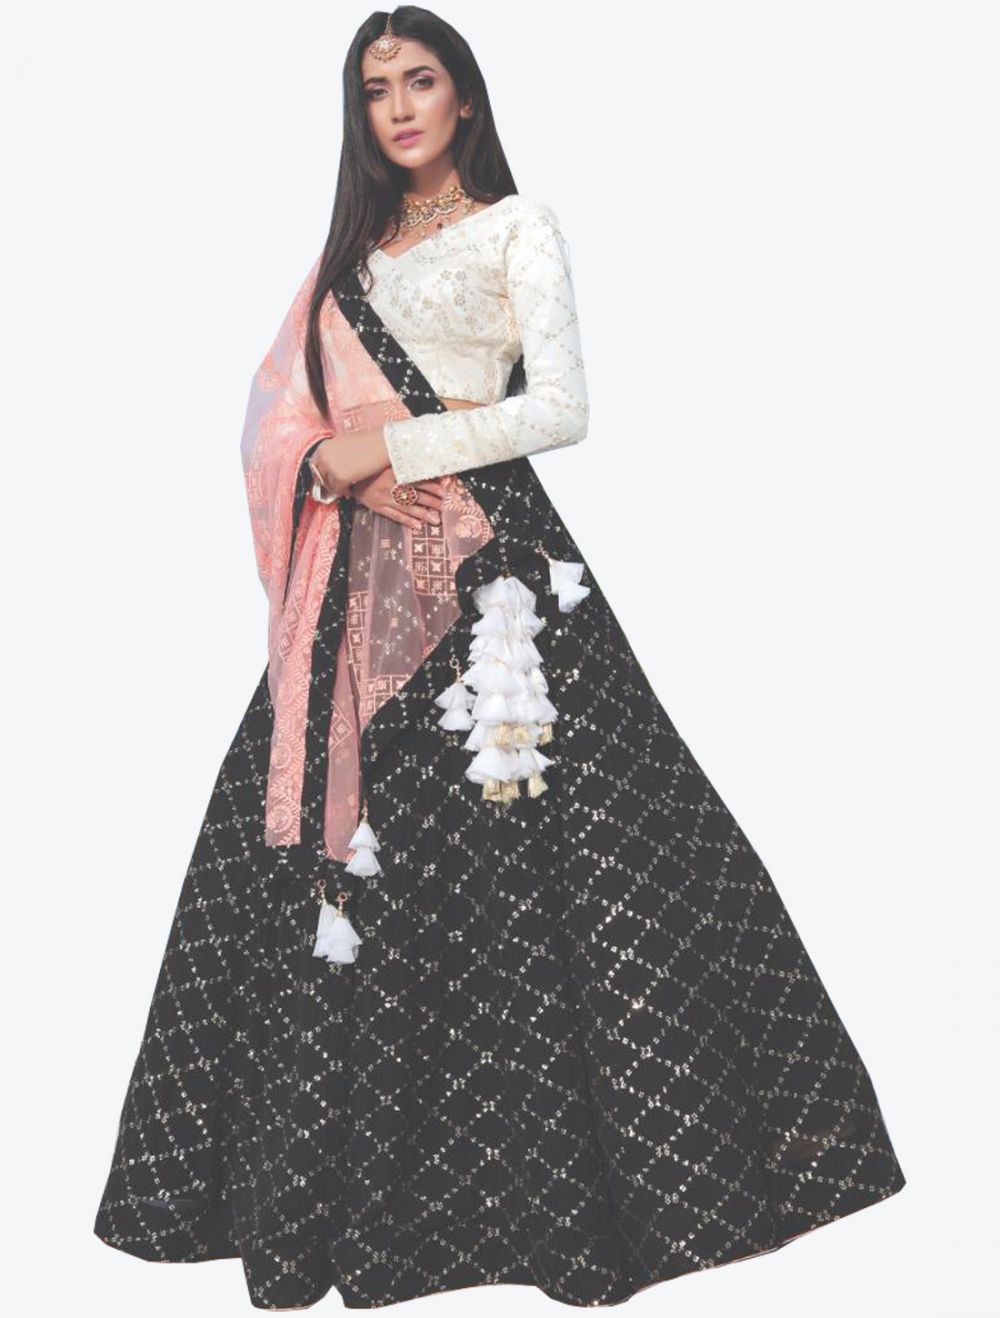 Designer Georgette Black Lehenga Choli With Embroidery Work and Georgette  Dupatta & Blouse for Indian Wedding and Party Wear Lehenga Choli - Etsy